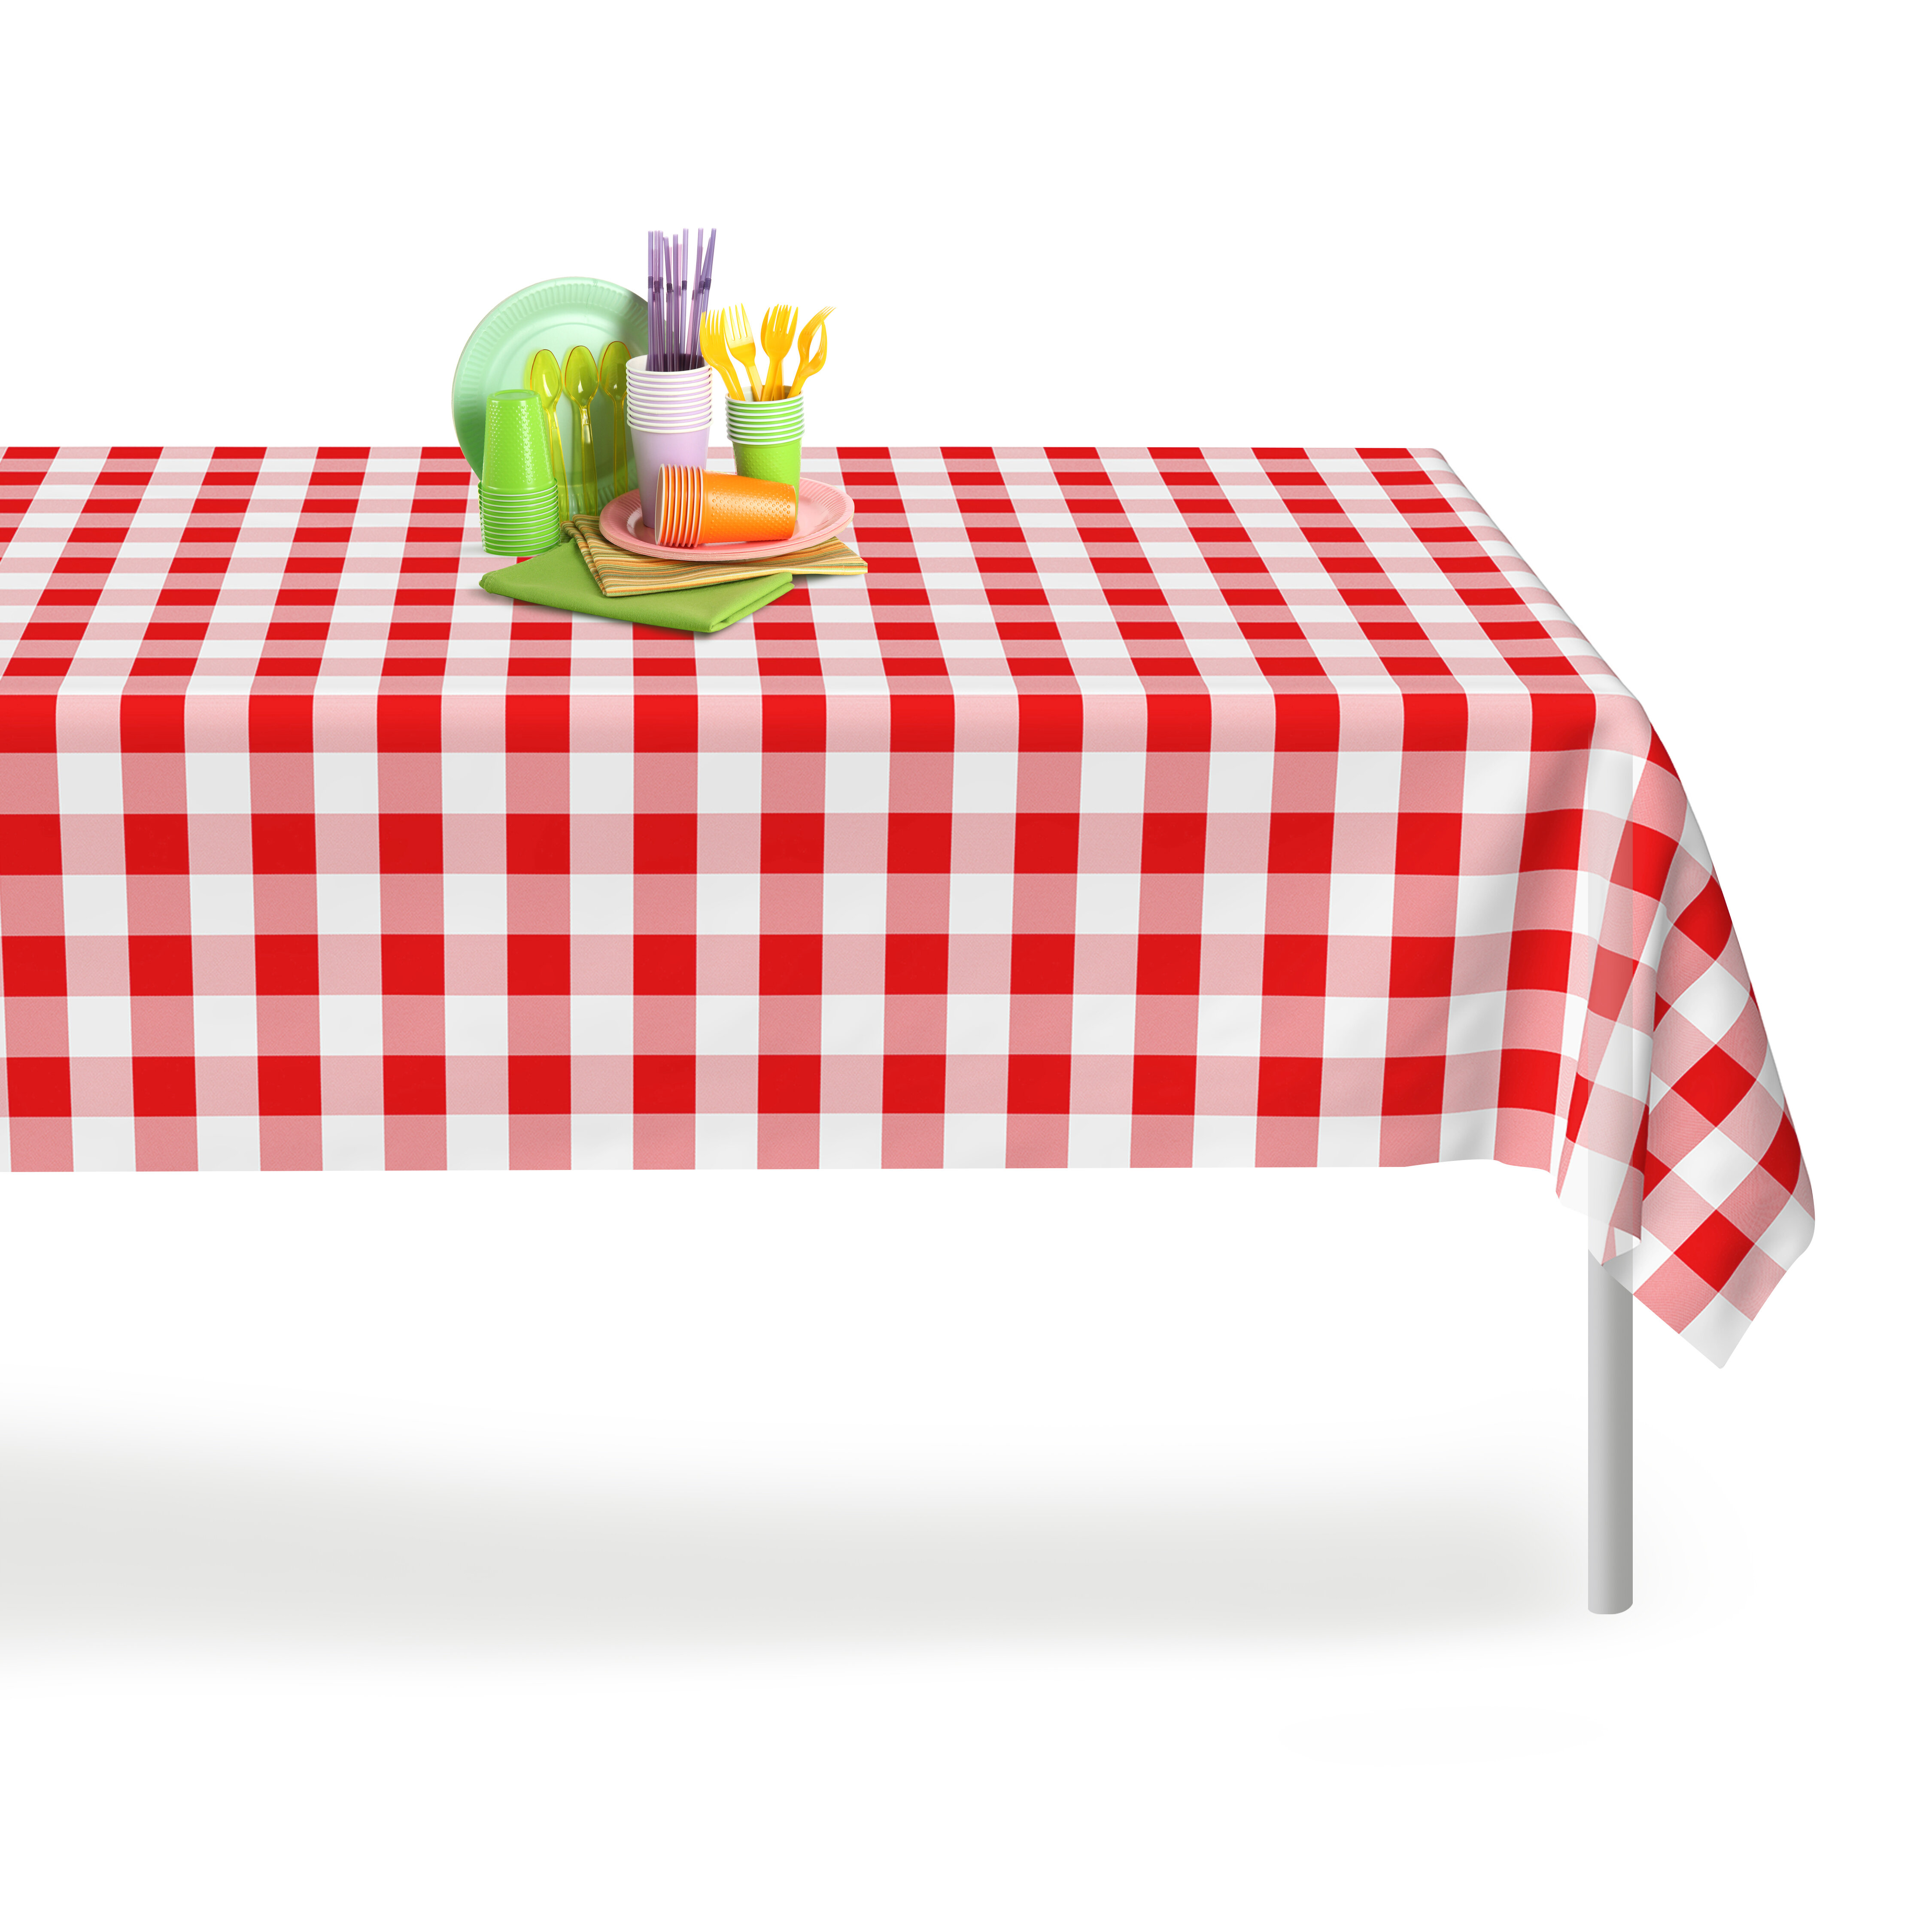 Decorative Rectangle Table Cover By Grandipity x 108 Inch Red Gingham Checkered 12 Pack Premium Disposable Plastic Picnic Tablecloth 54 Inch